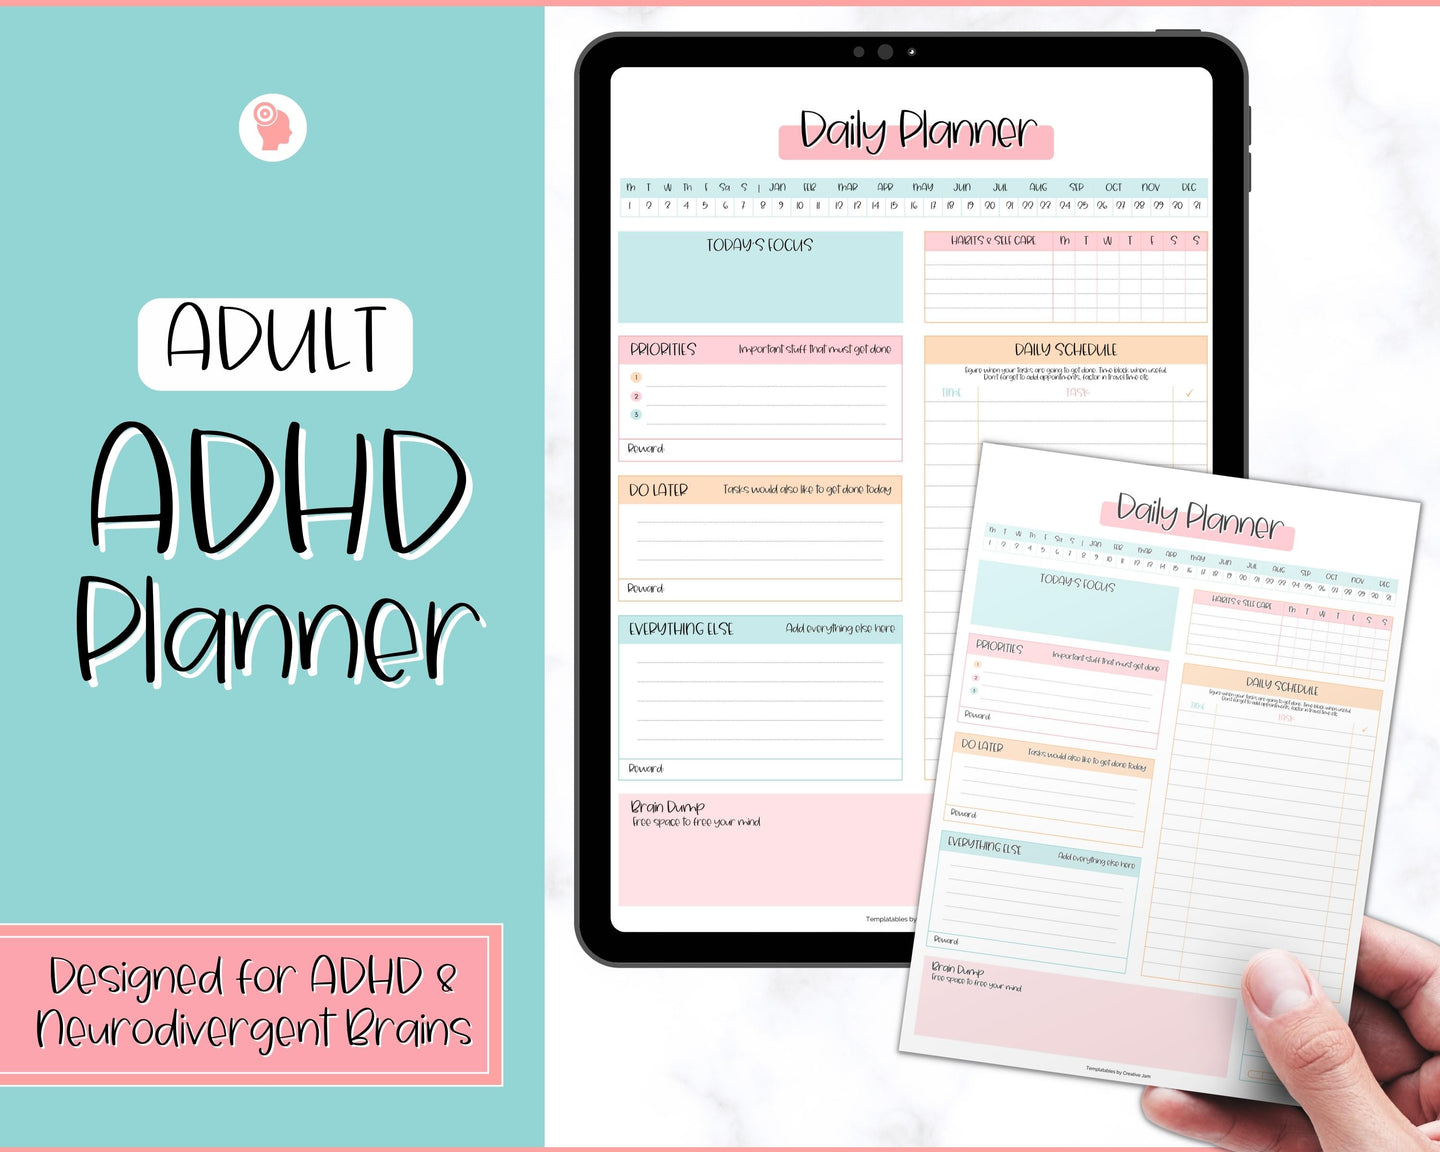 ADHD Daily Planner for Adults - Made for Neurodivergent Brains | Colorful Sky